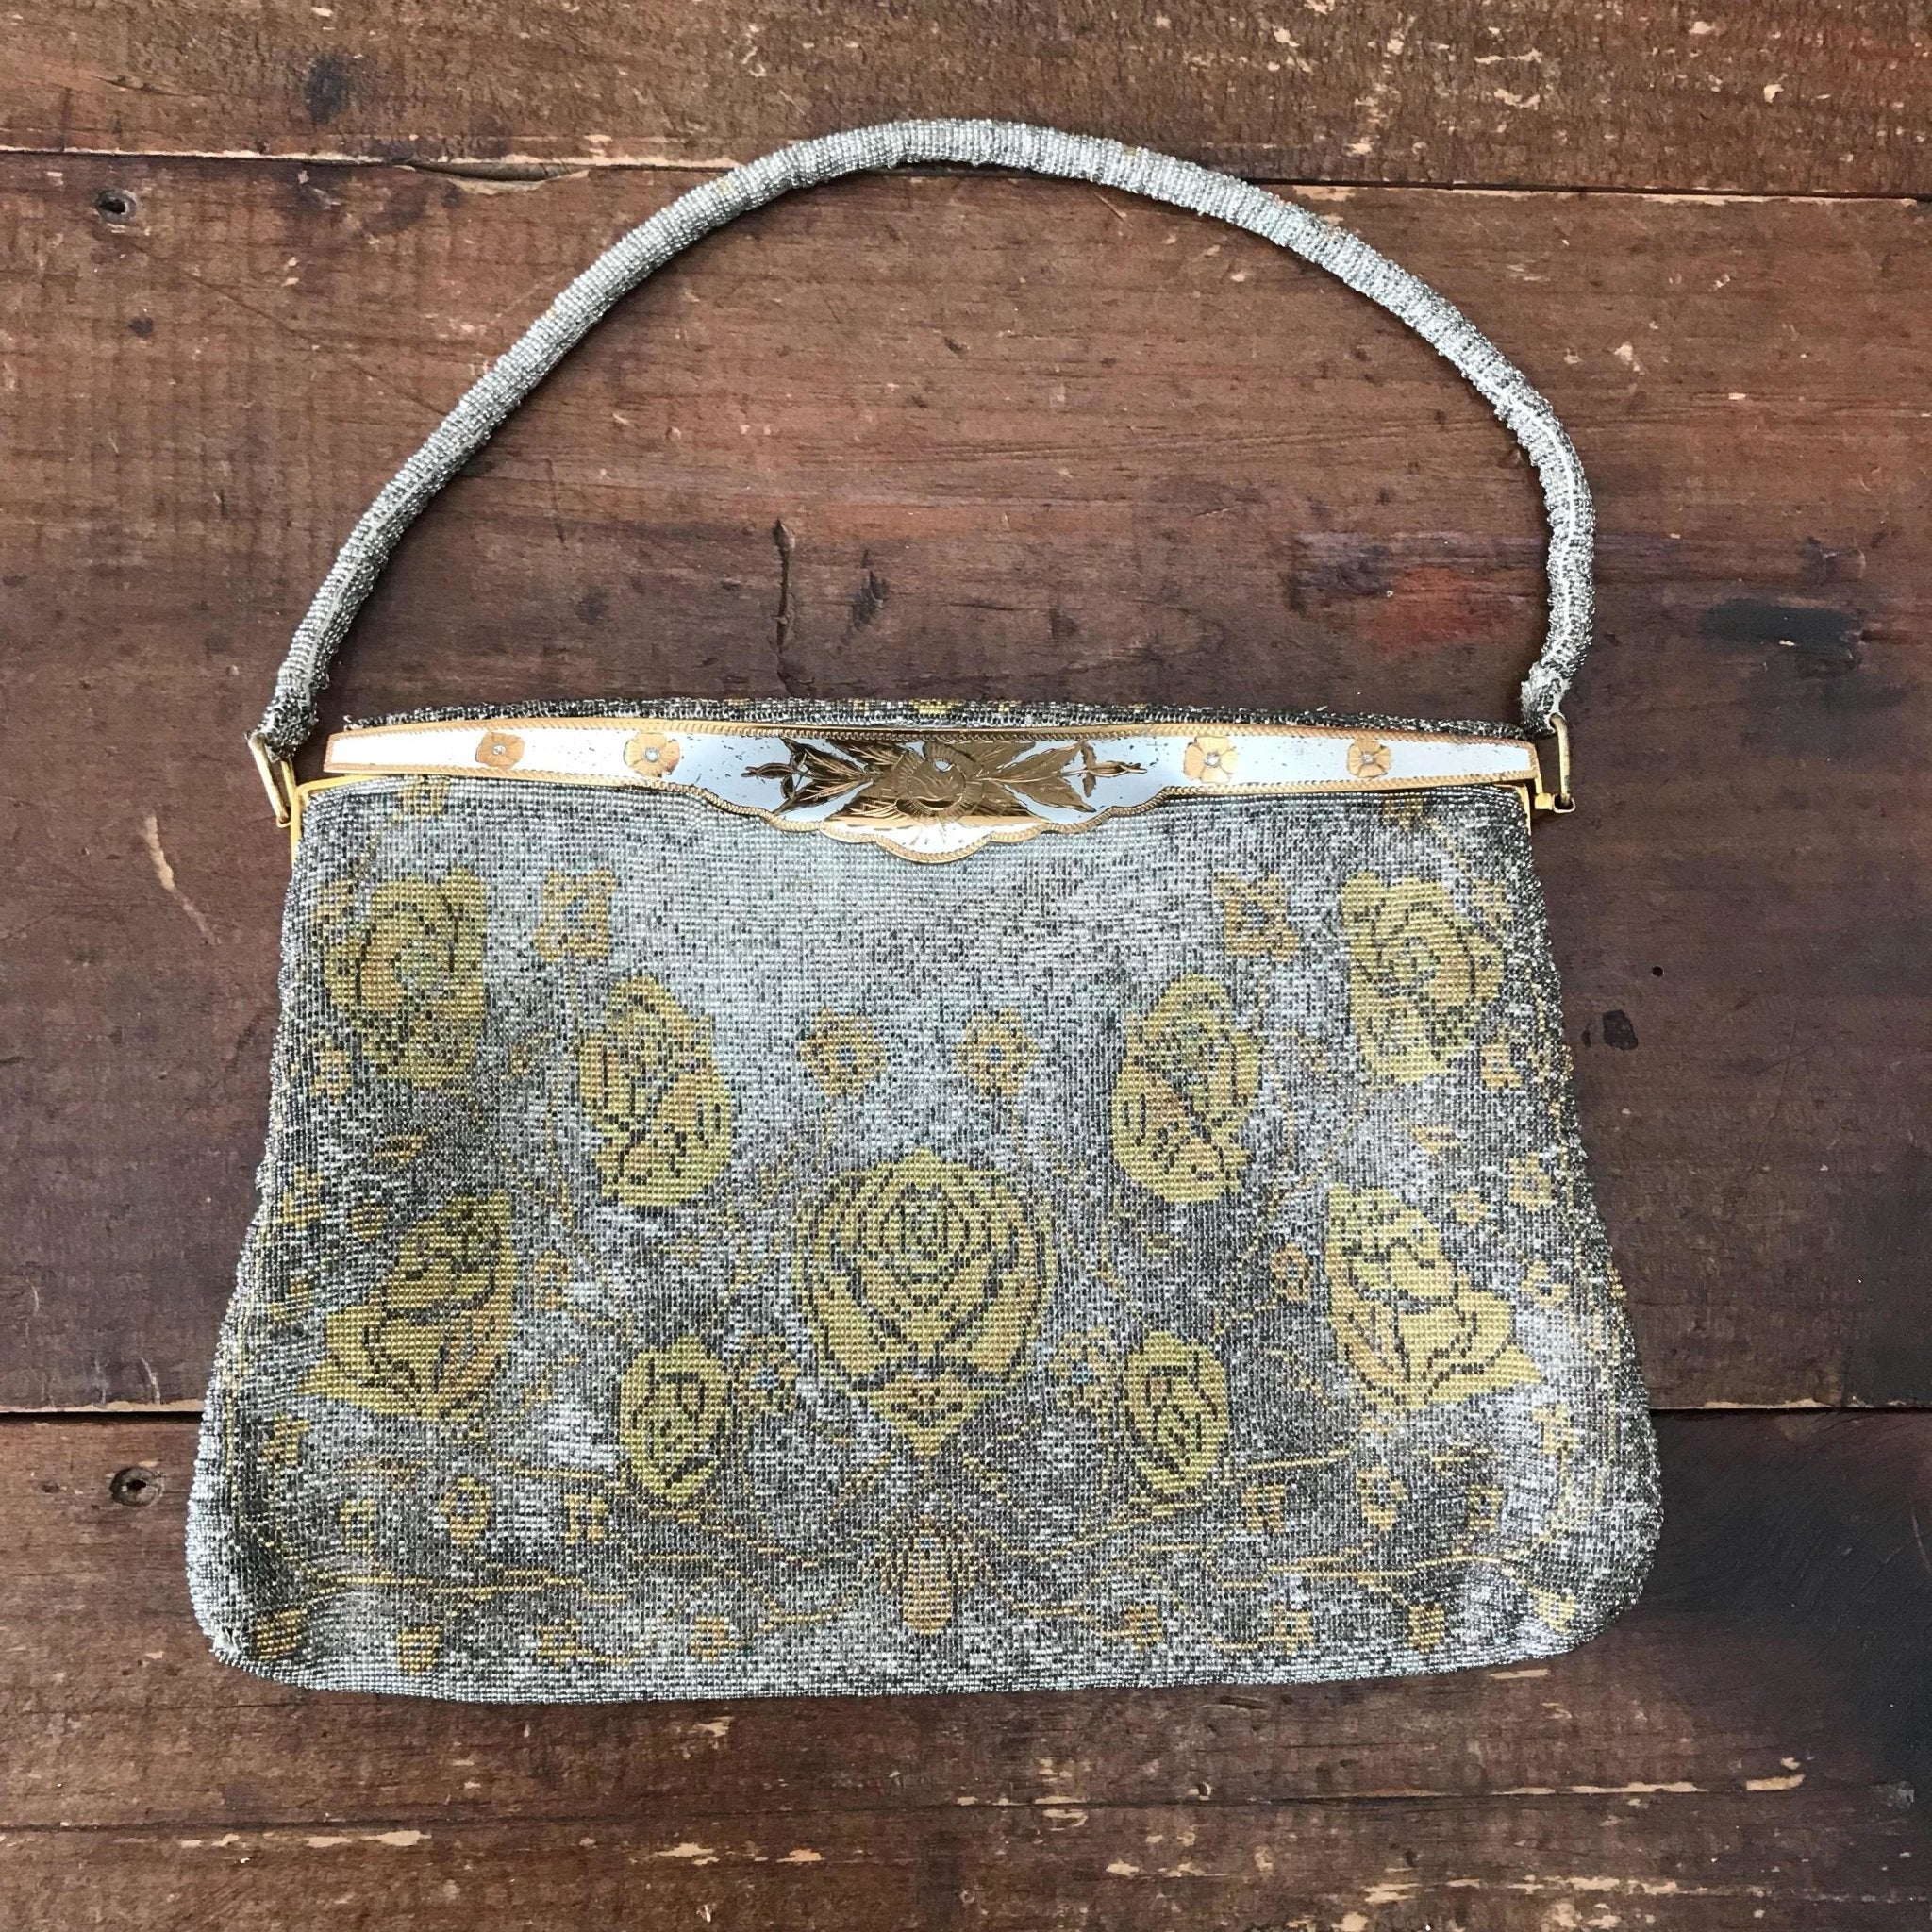 Vintage Floral Tapestry Purse Petit Point Fabric, Clutch Bag, Hand Bag by  Birks Canada Ca 1920-1930 Brass Frame With Chain and Silk Lining - Etsy  Canada | Floral tapestry, Vintage floral, Clutch bag